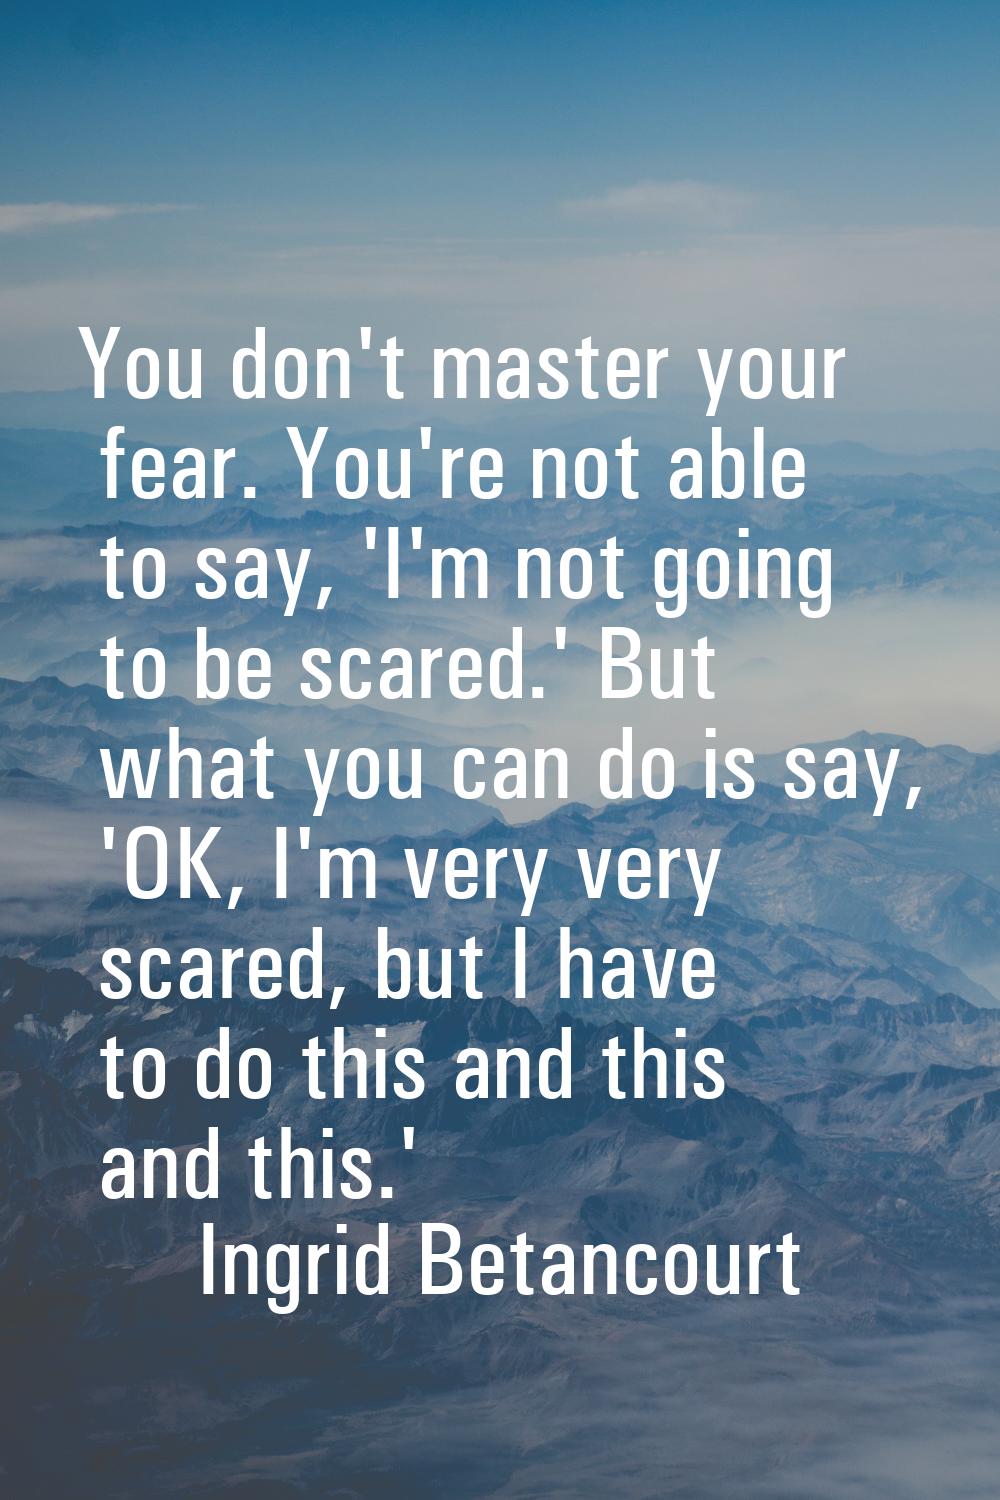 You don't master your fear. You're not able to say, 'I'm not going to be scared.' But what you can 